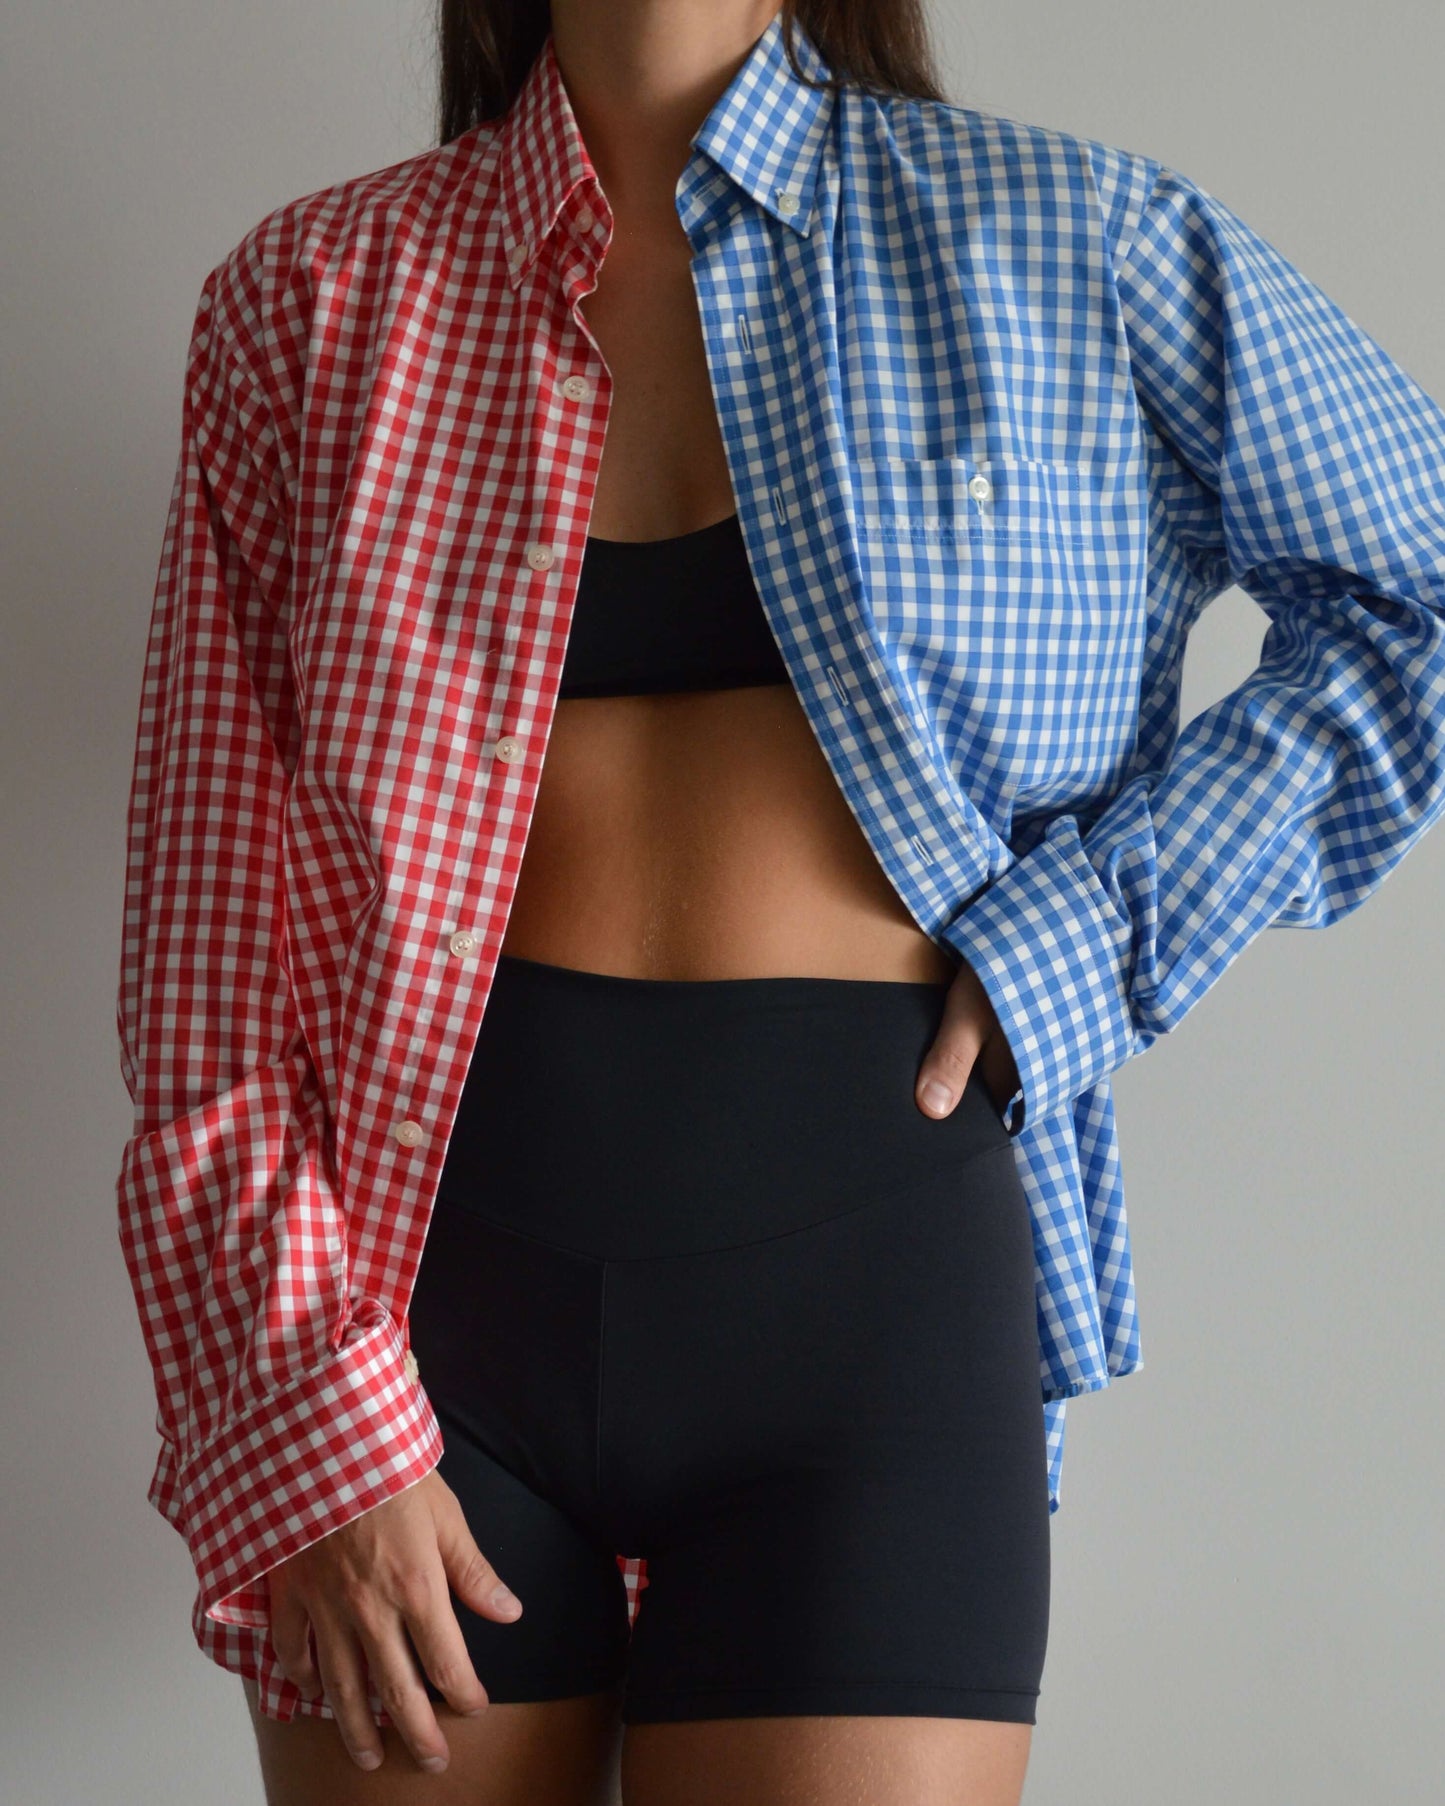 DUO Shirt - Squared (S/L)